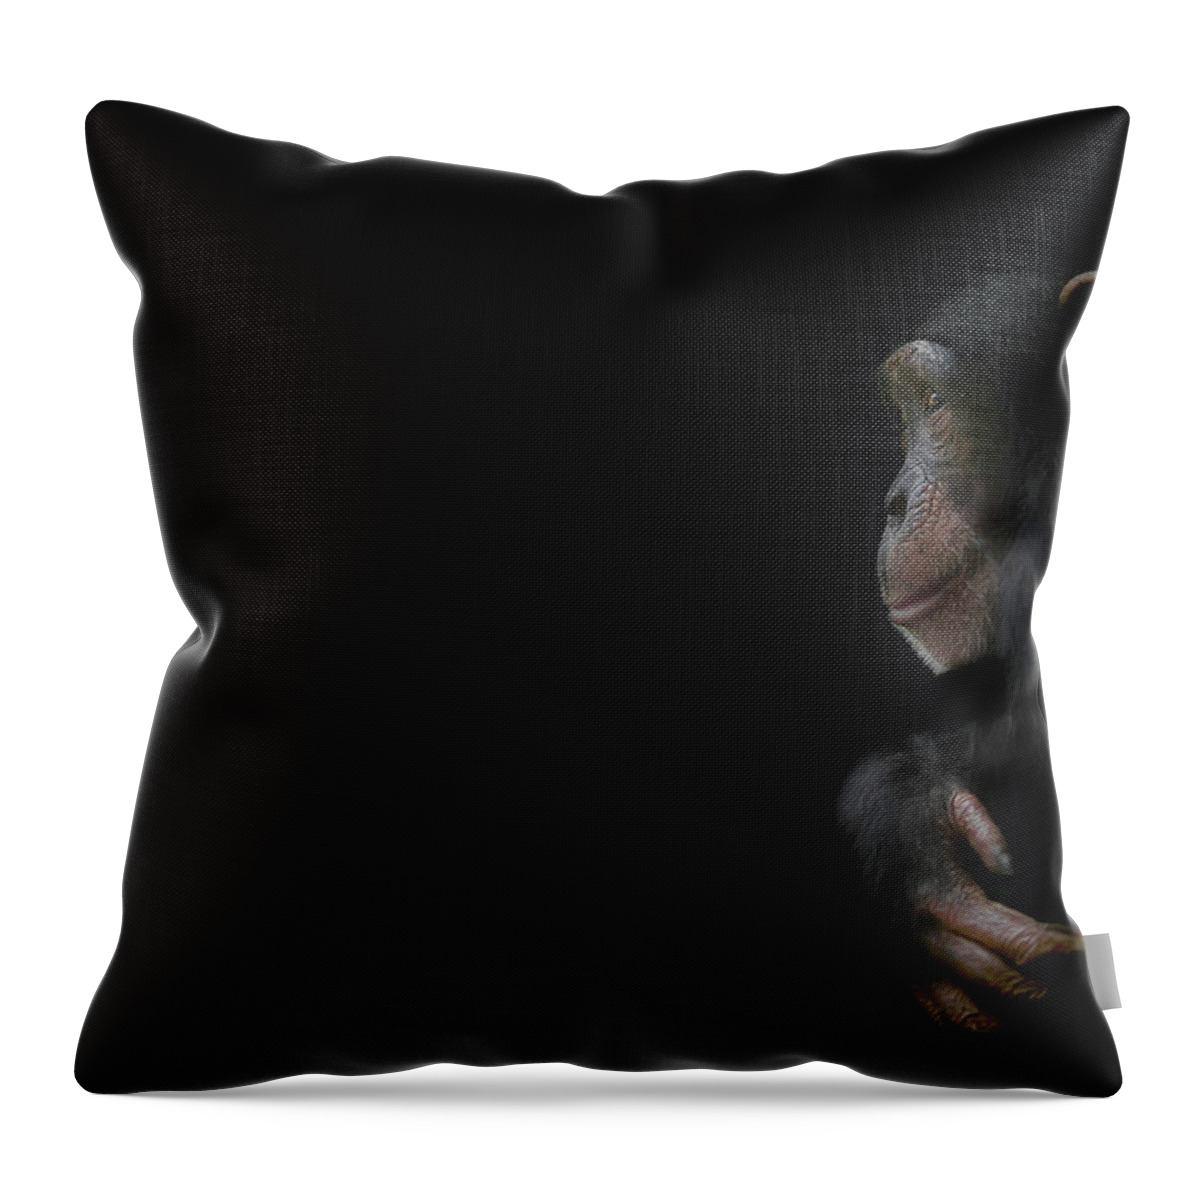 Chimpanzee Throw Pillow featuring the photograph Innocence by Paul Neville